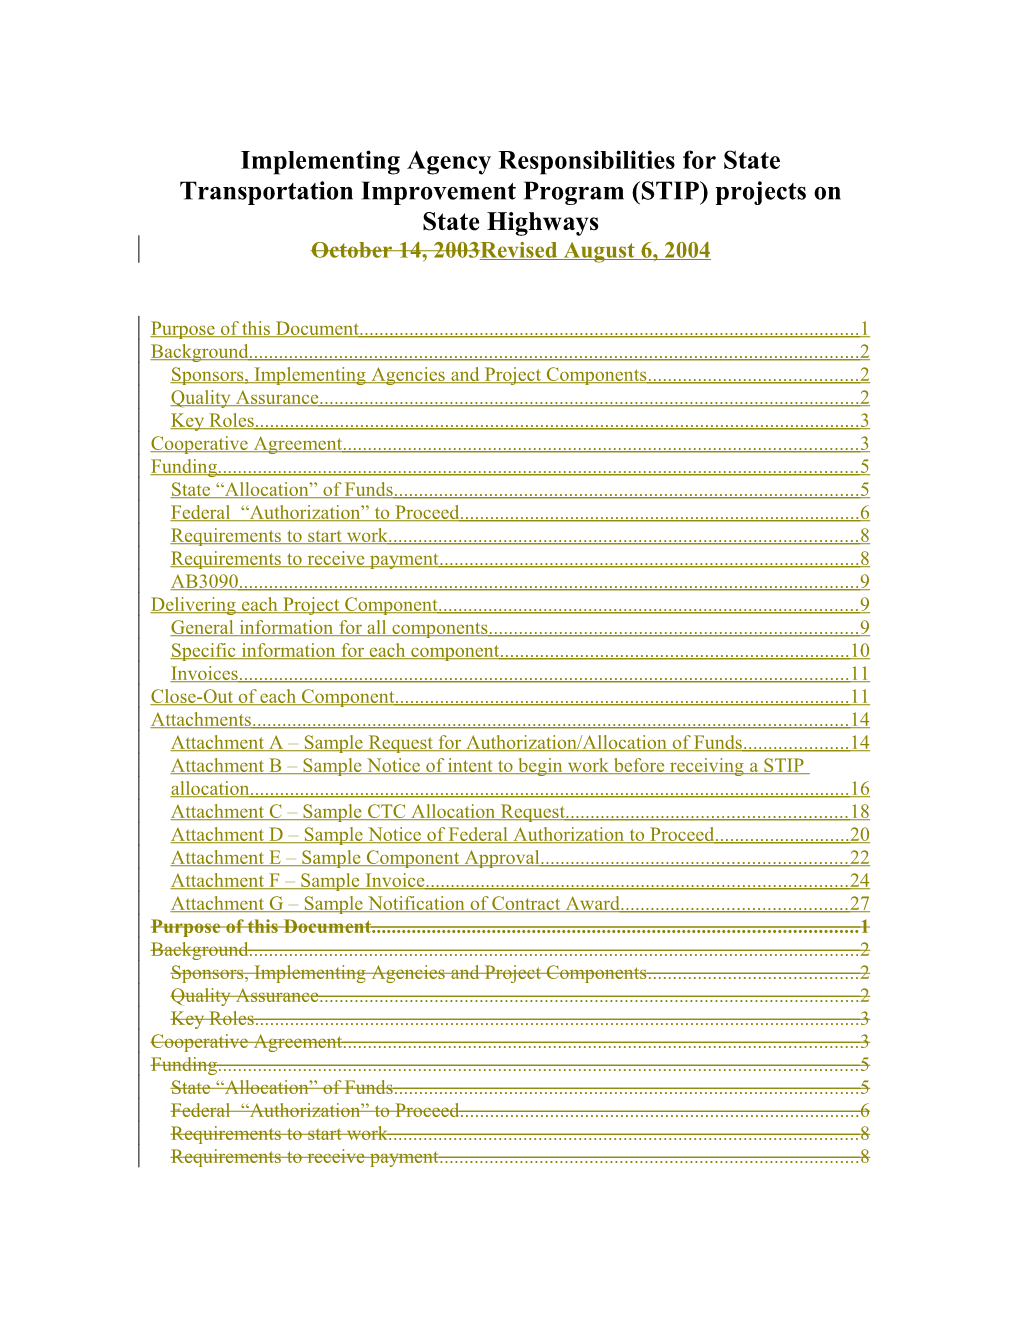 DRAFT Responsibilities of the Implementing Agency on STIP Projects on a State Highway